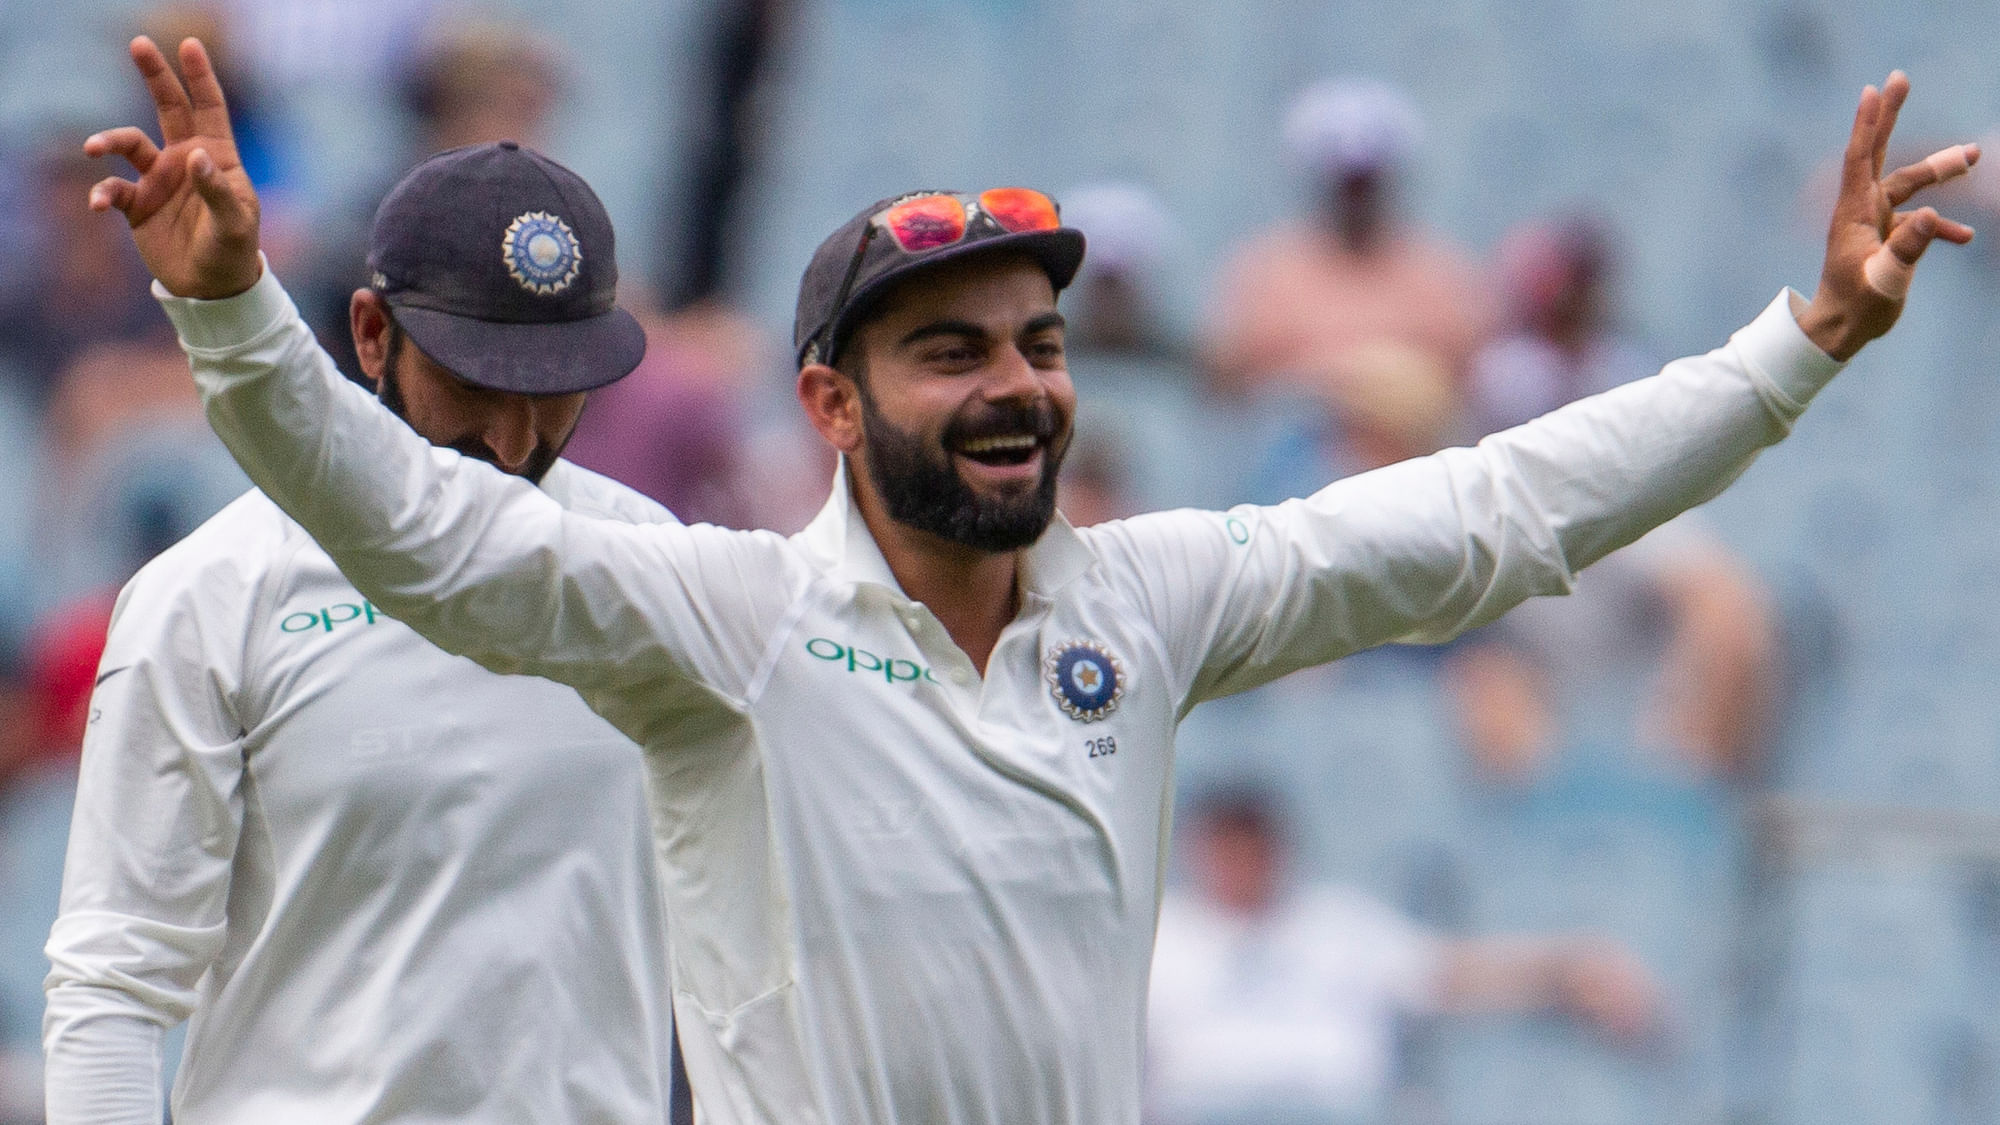 Virat Kohli became the first cricketer to win three major ICC awards in a year.